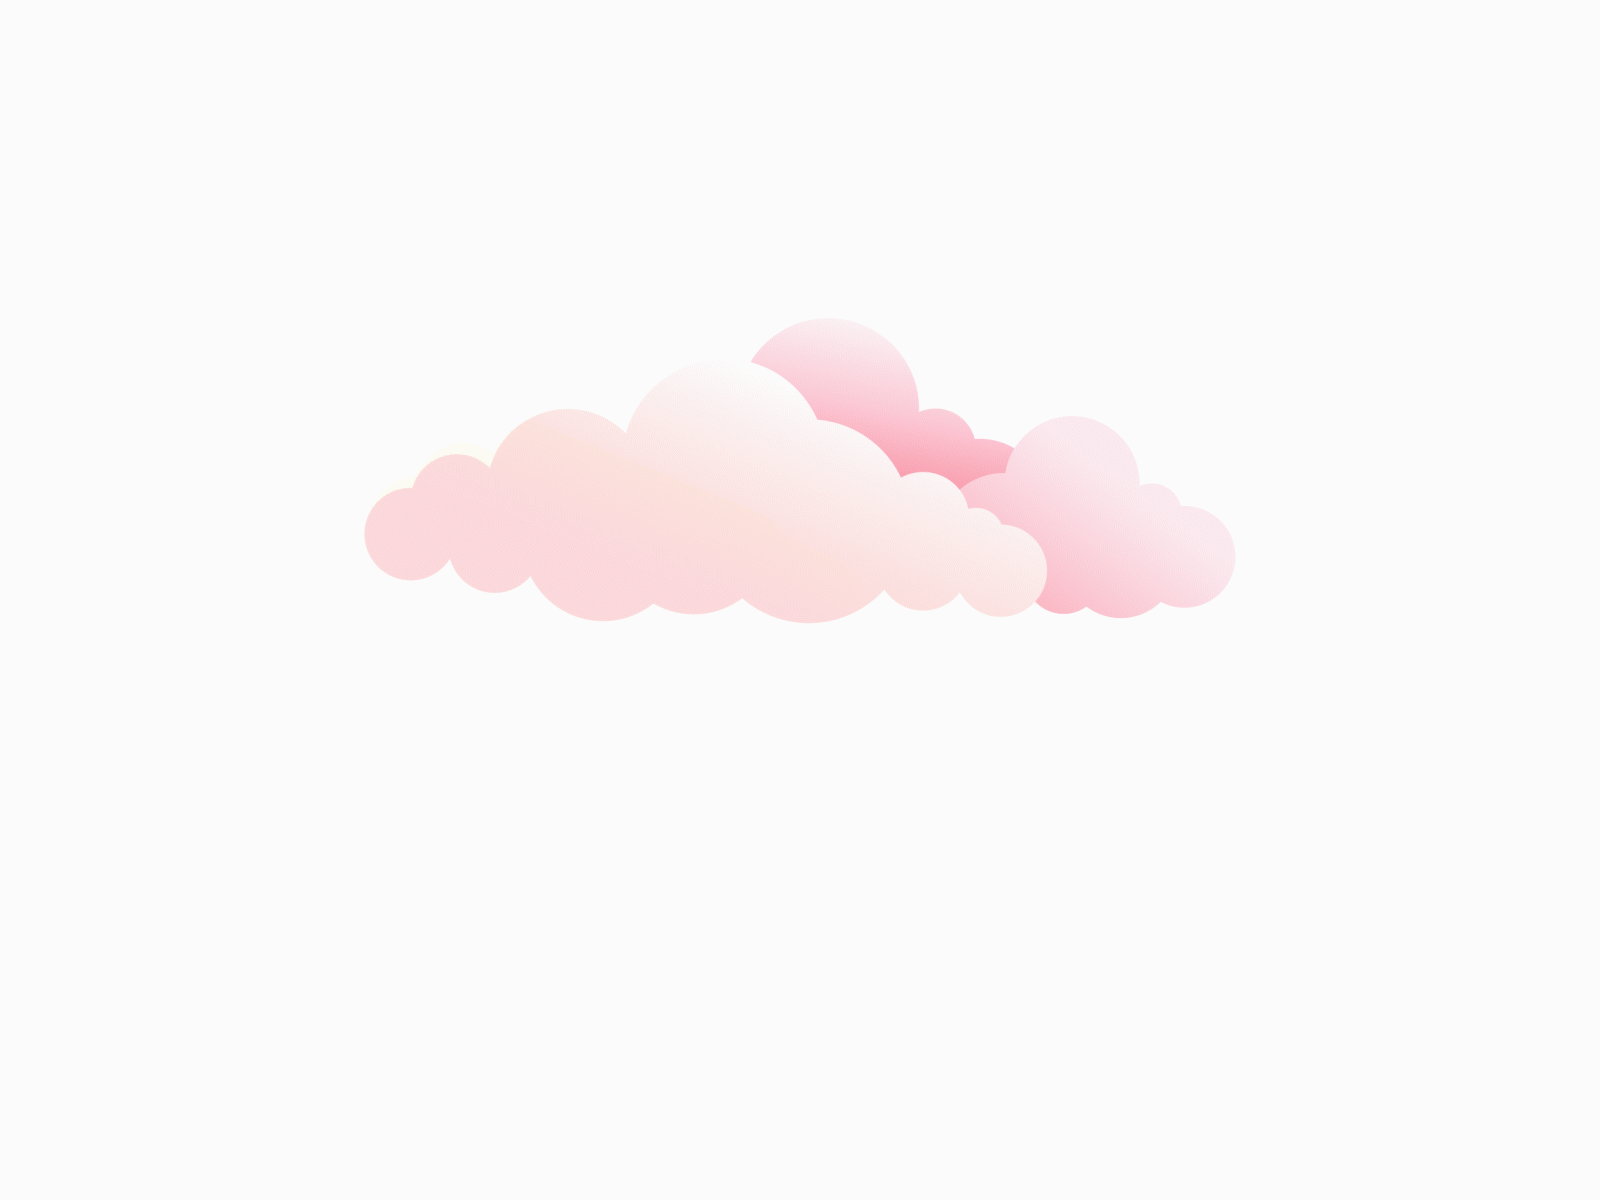 Aesthetic Dreamy Download after effects clouds download dreamy illustration illustrator motion graphics